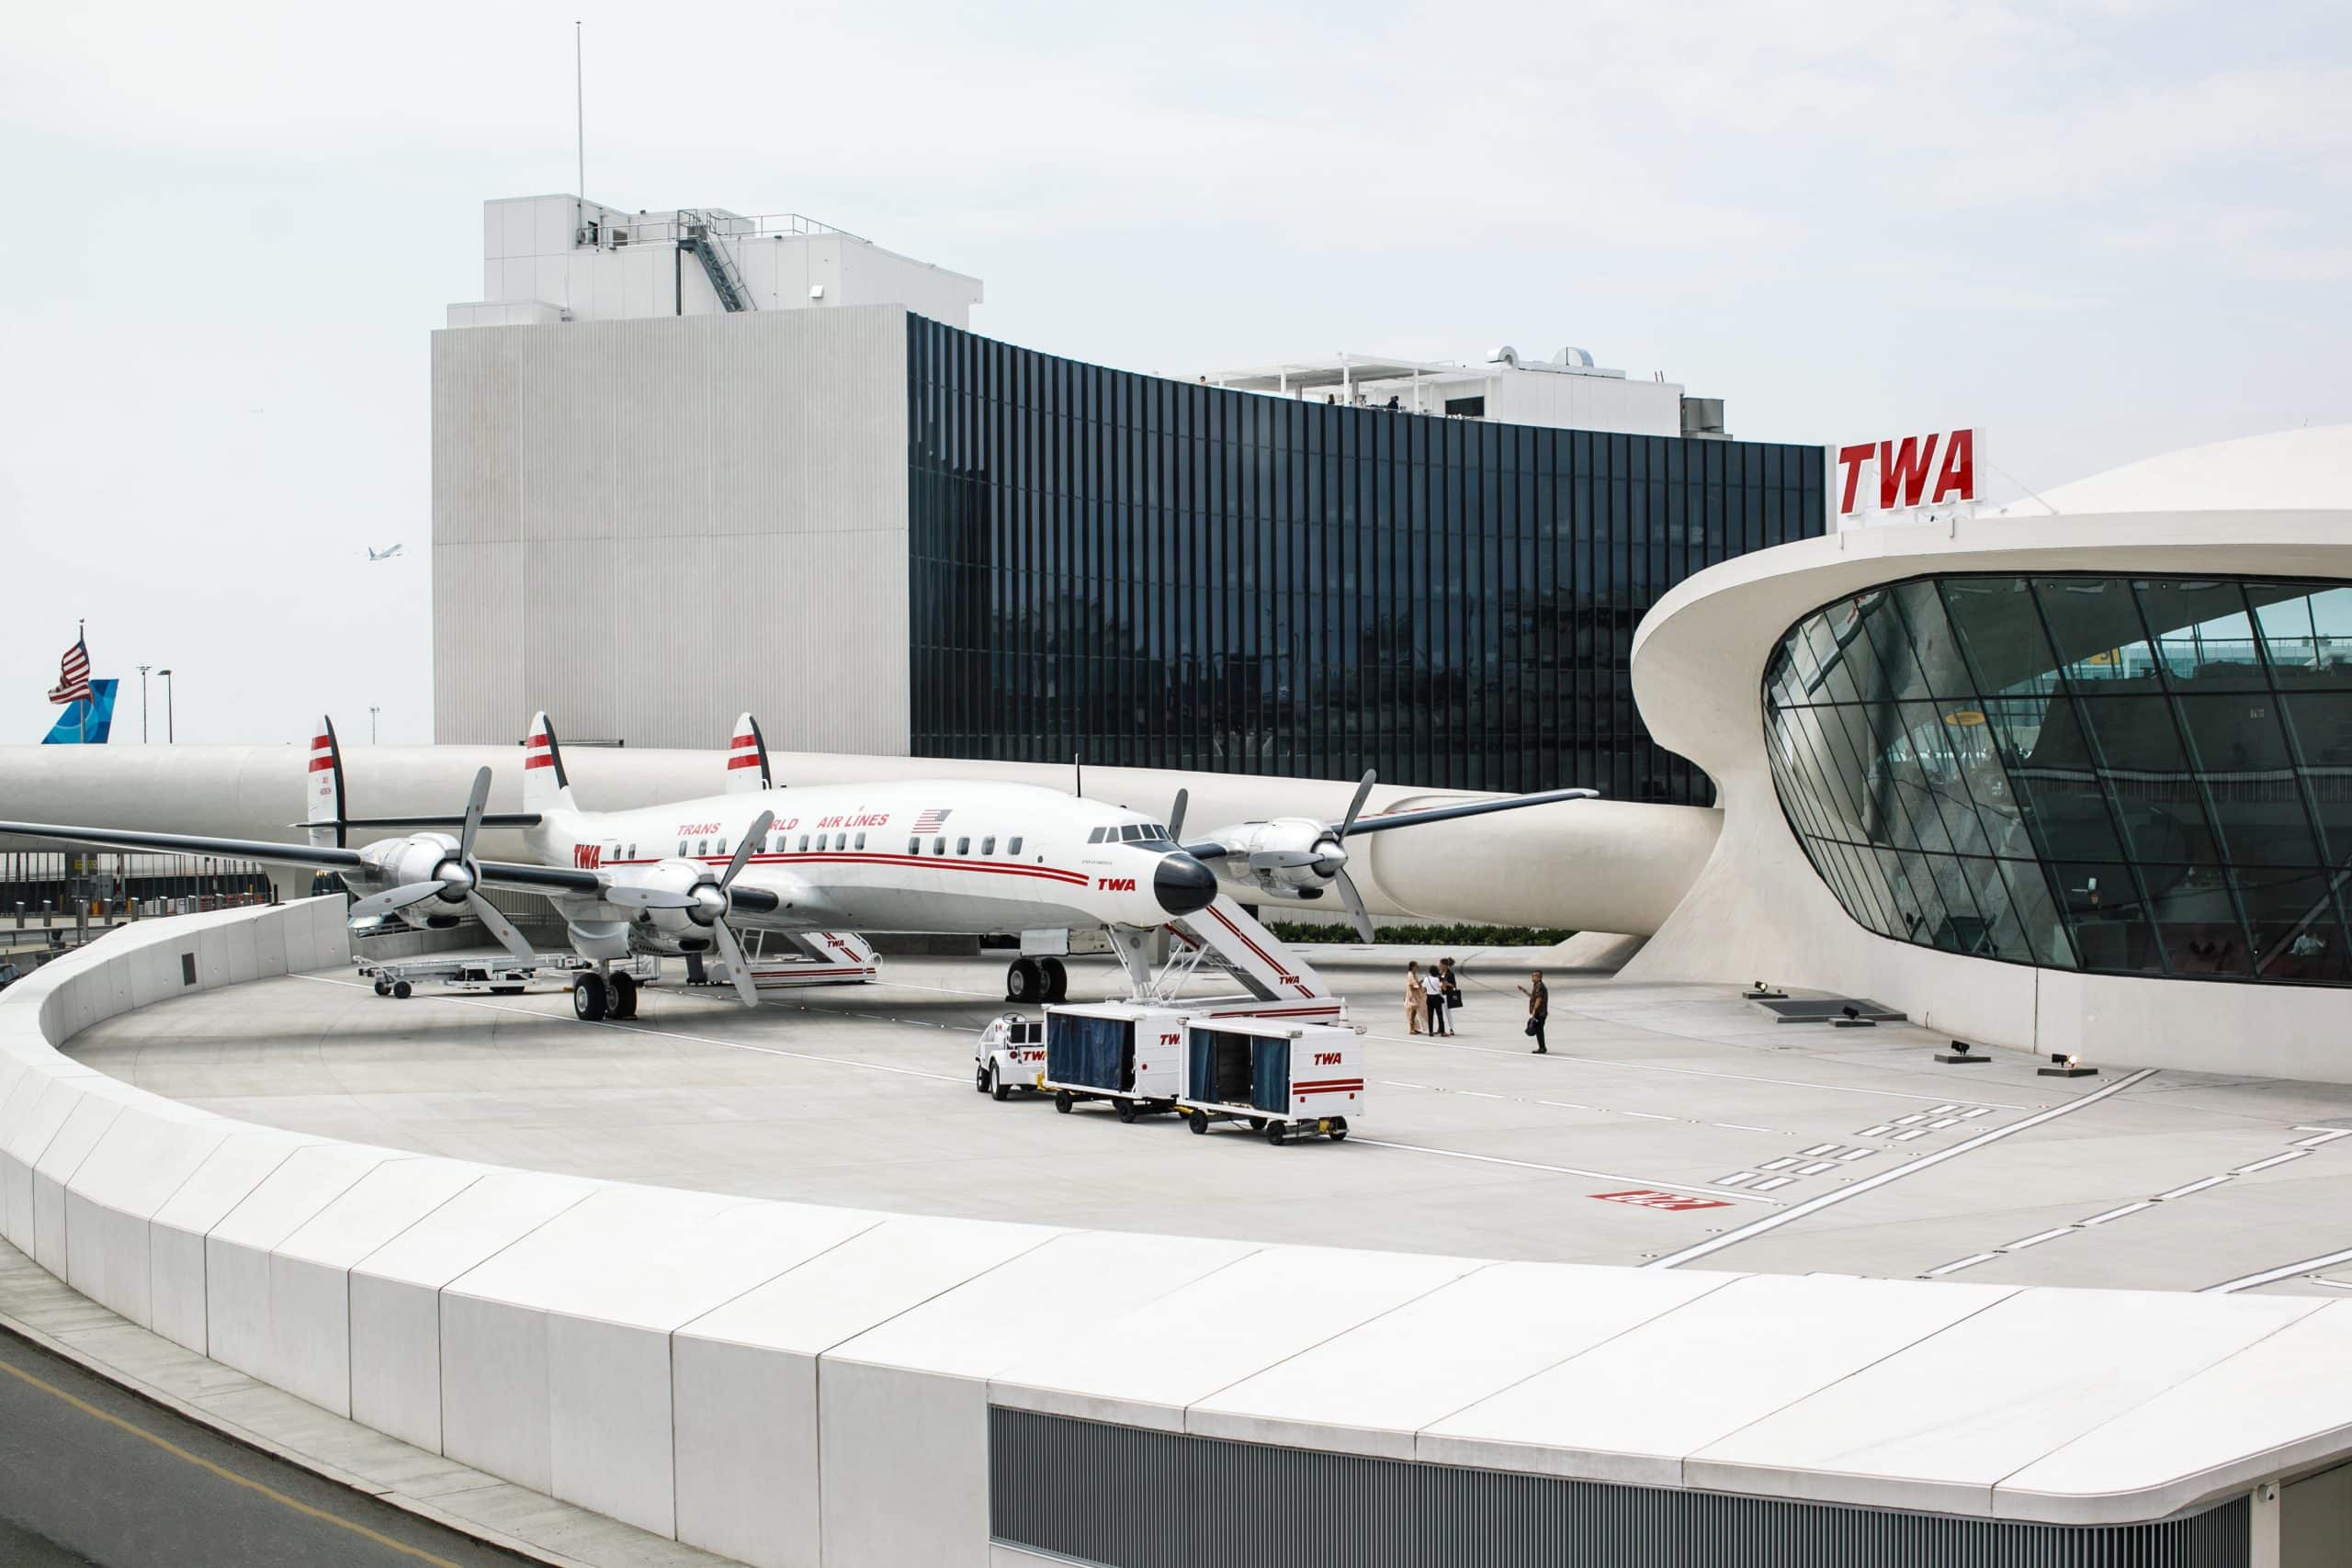 TWA Hotel exterior, with an original TWA plane that has been turned into a cocktail bar.